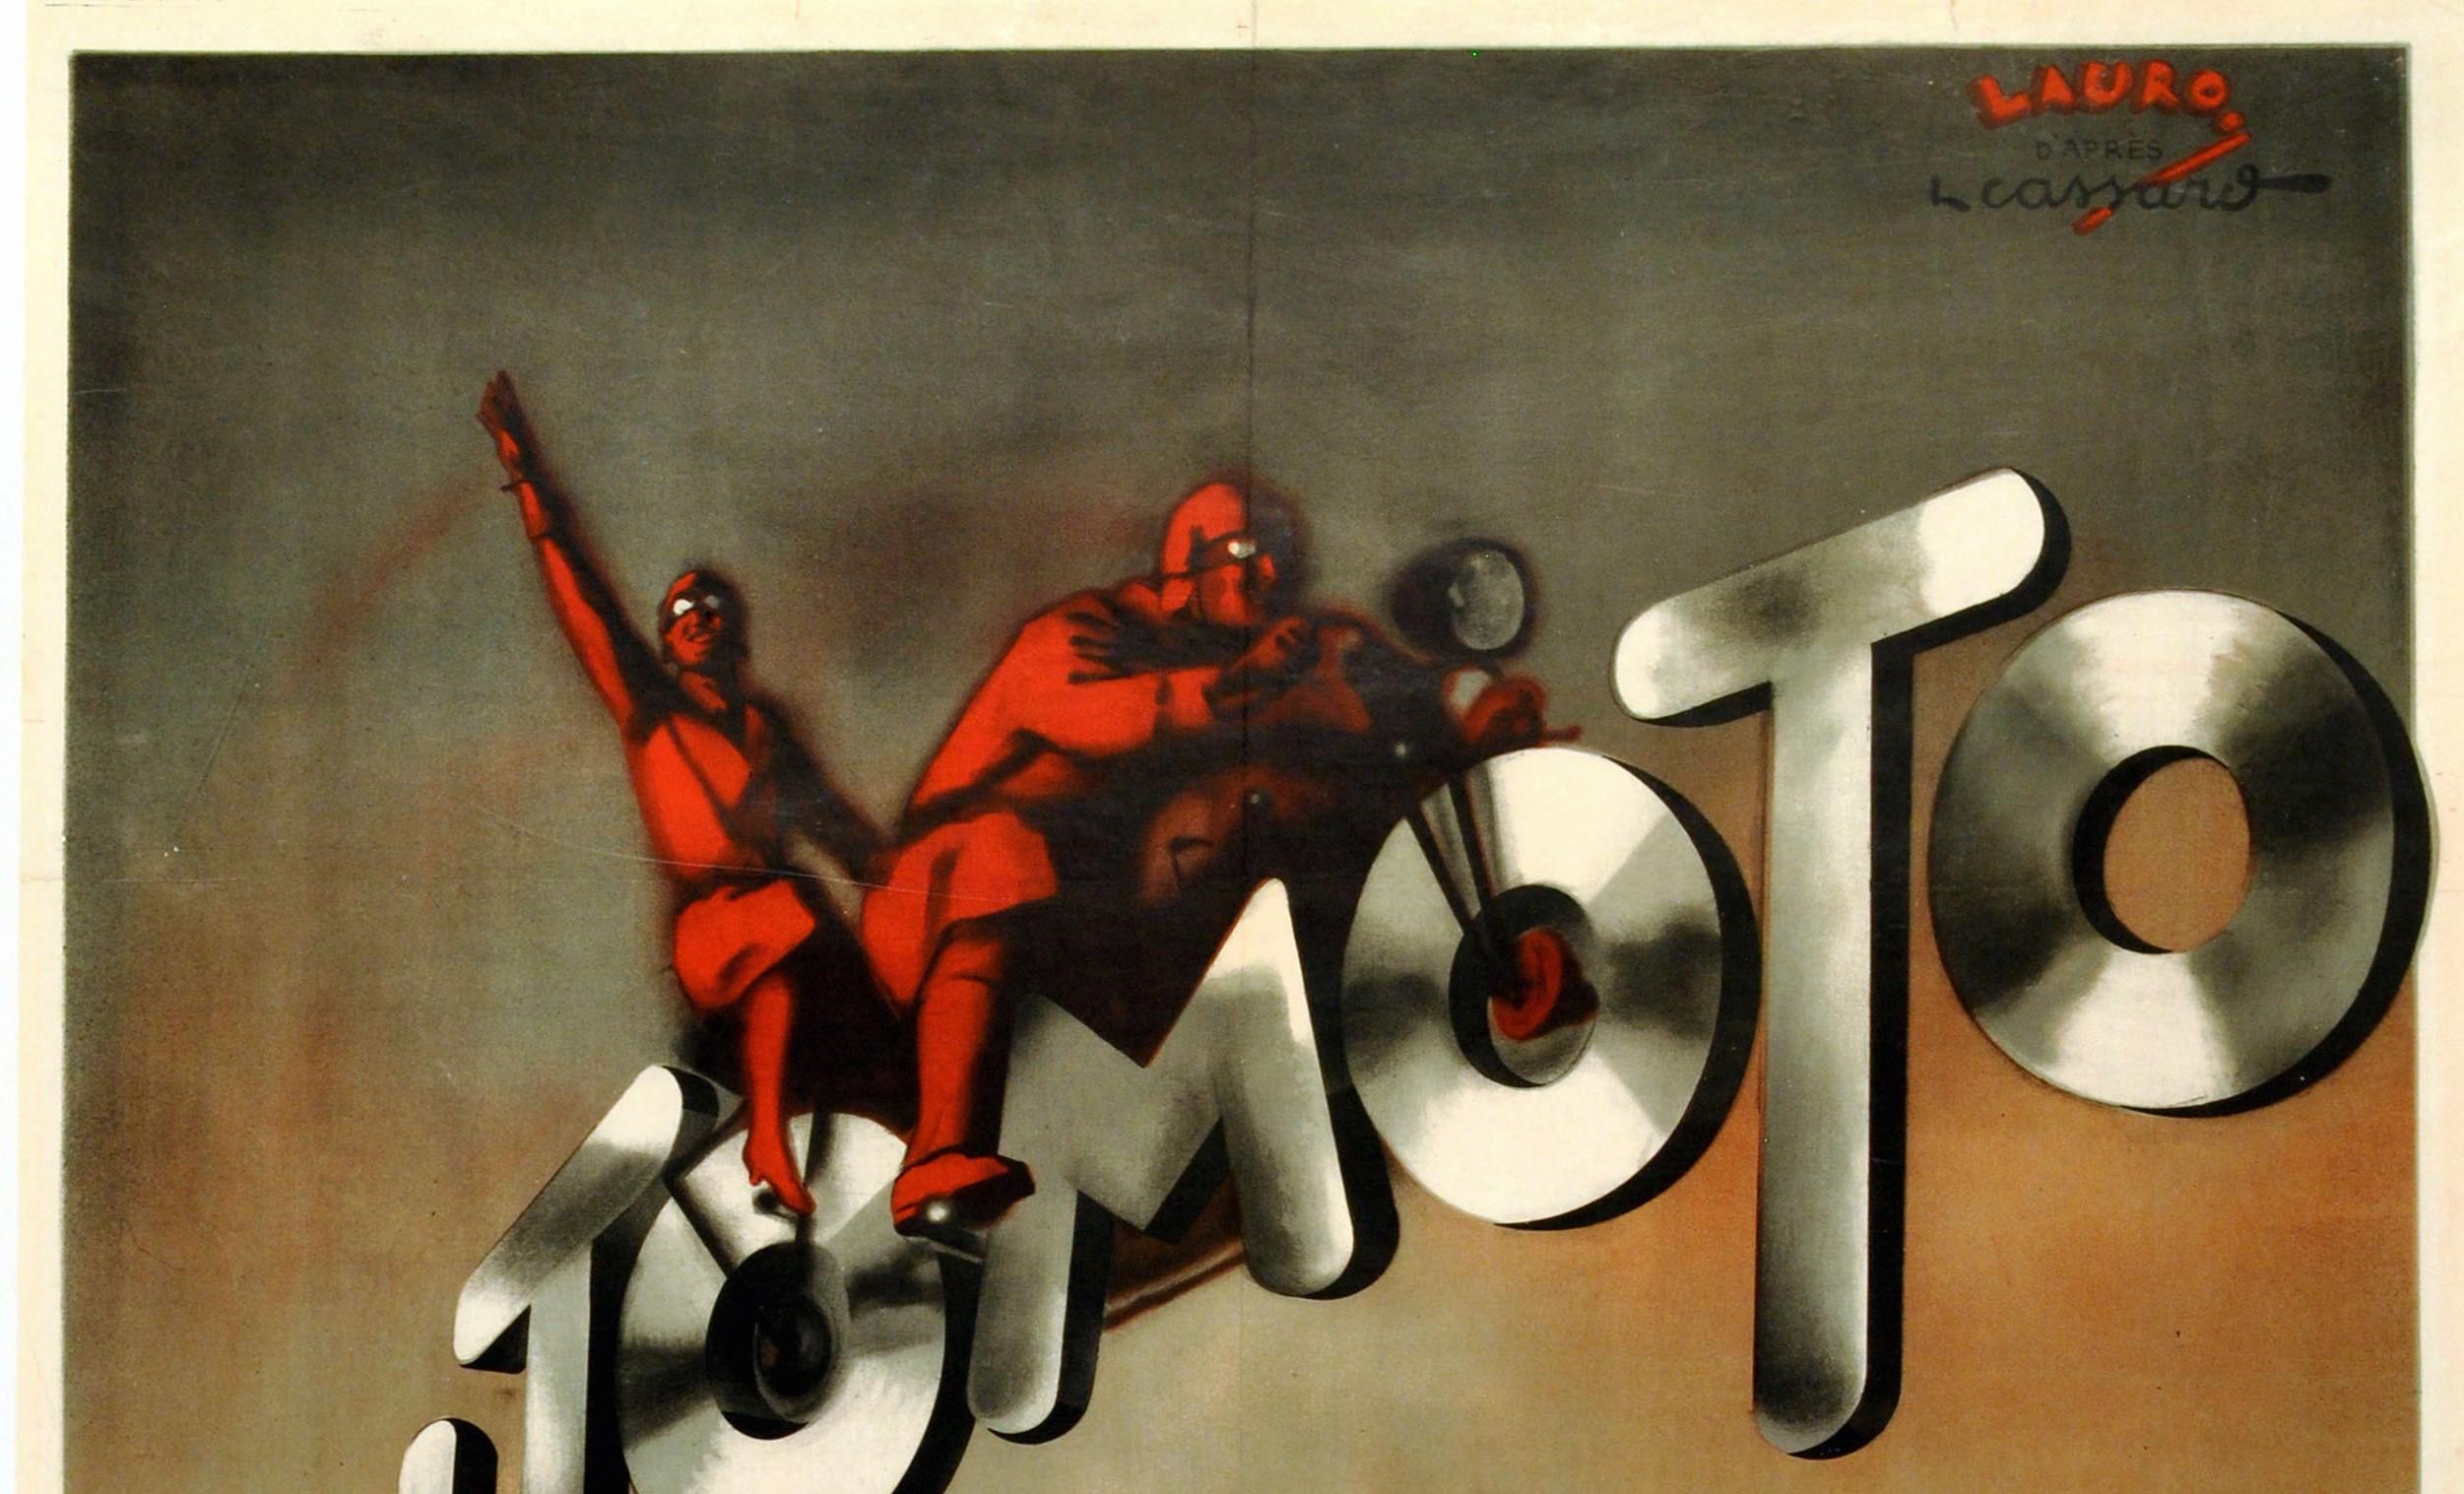 Original vintage poster for Automoto Motos, a French manufacturer of bicycles and motorcycles (1898-1962). Great Art Deco design featuring two motorcyclists on a bike, the wheels formed from the letters O in the text, with the Automoto brand's